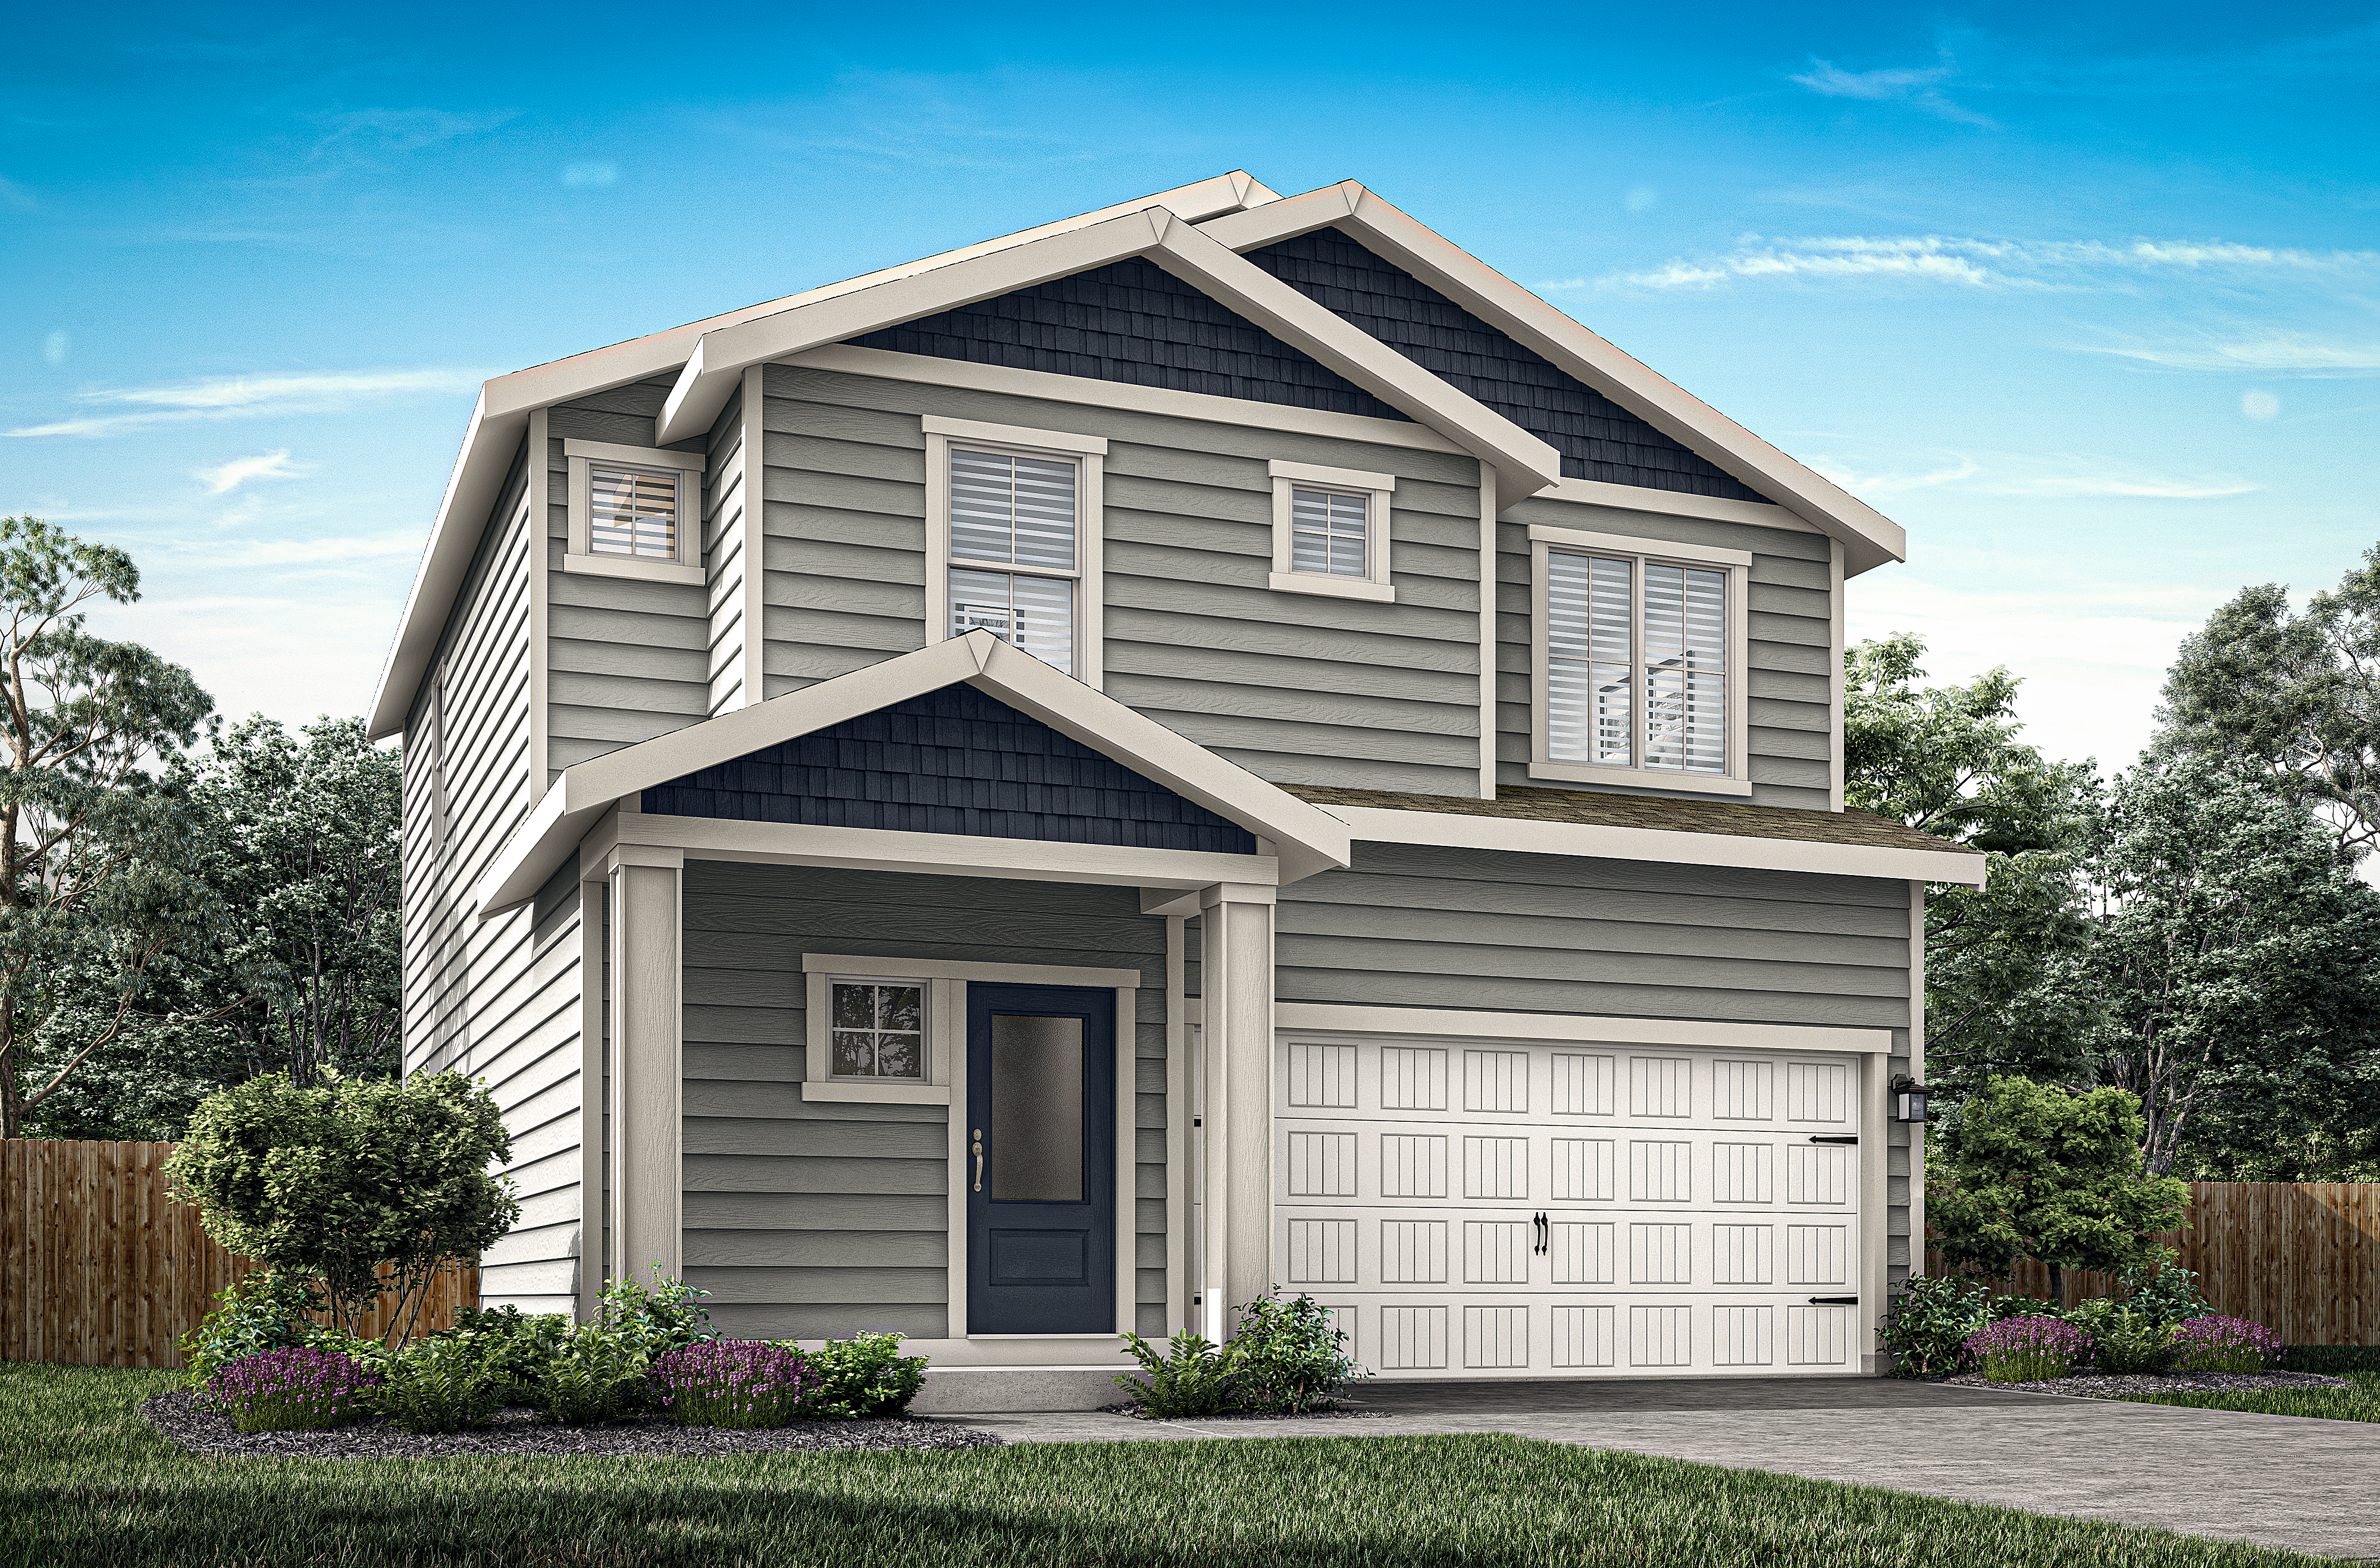 New construction homes with three to four bedrooms are now available at Eagle Landing in Tacoma, WA.